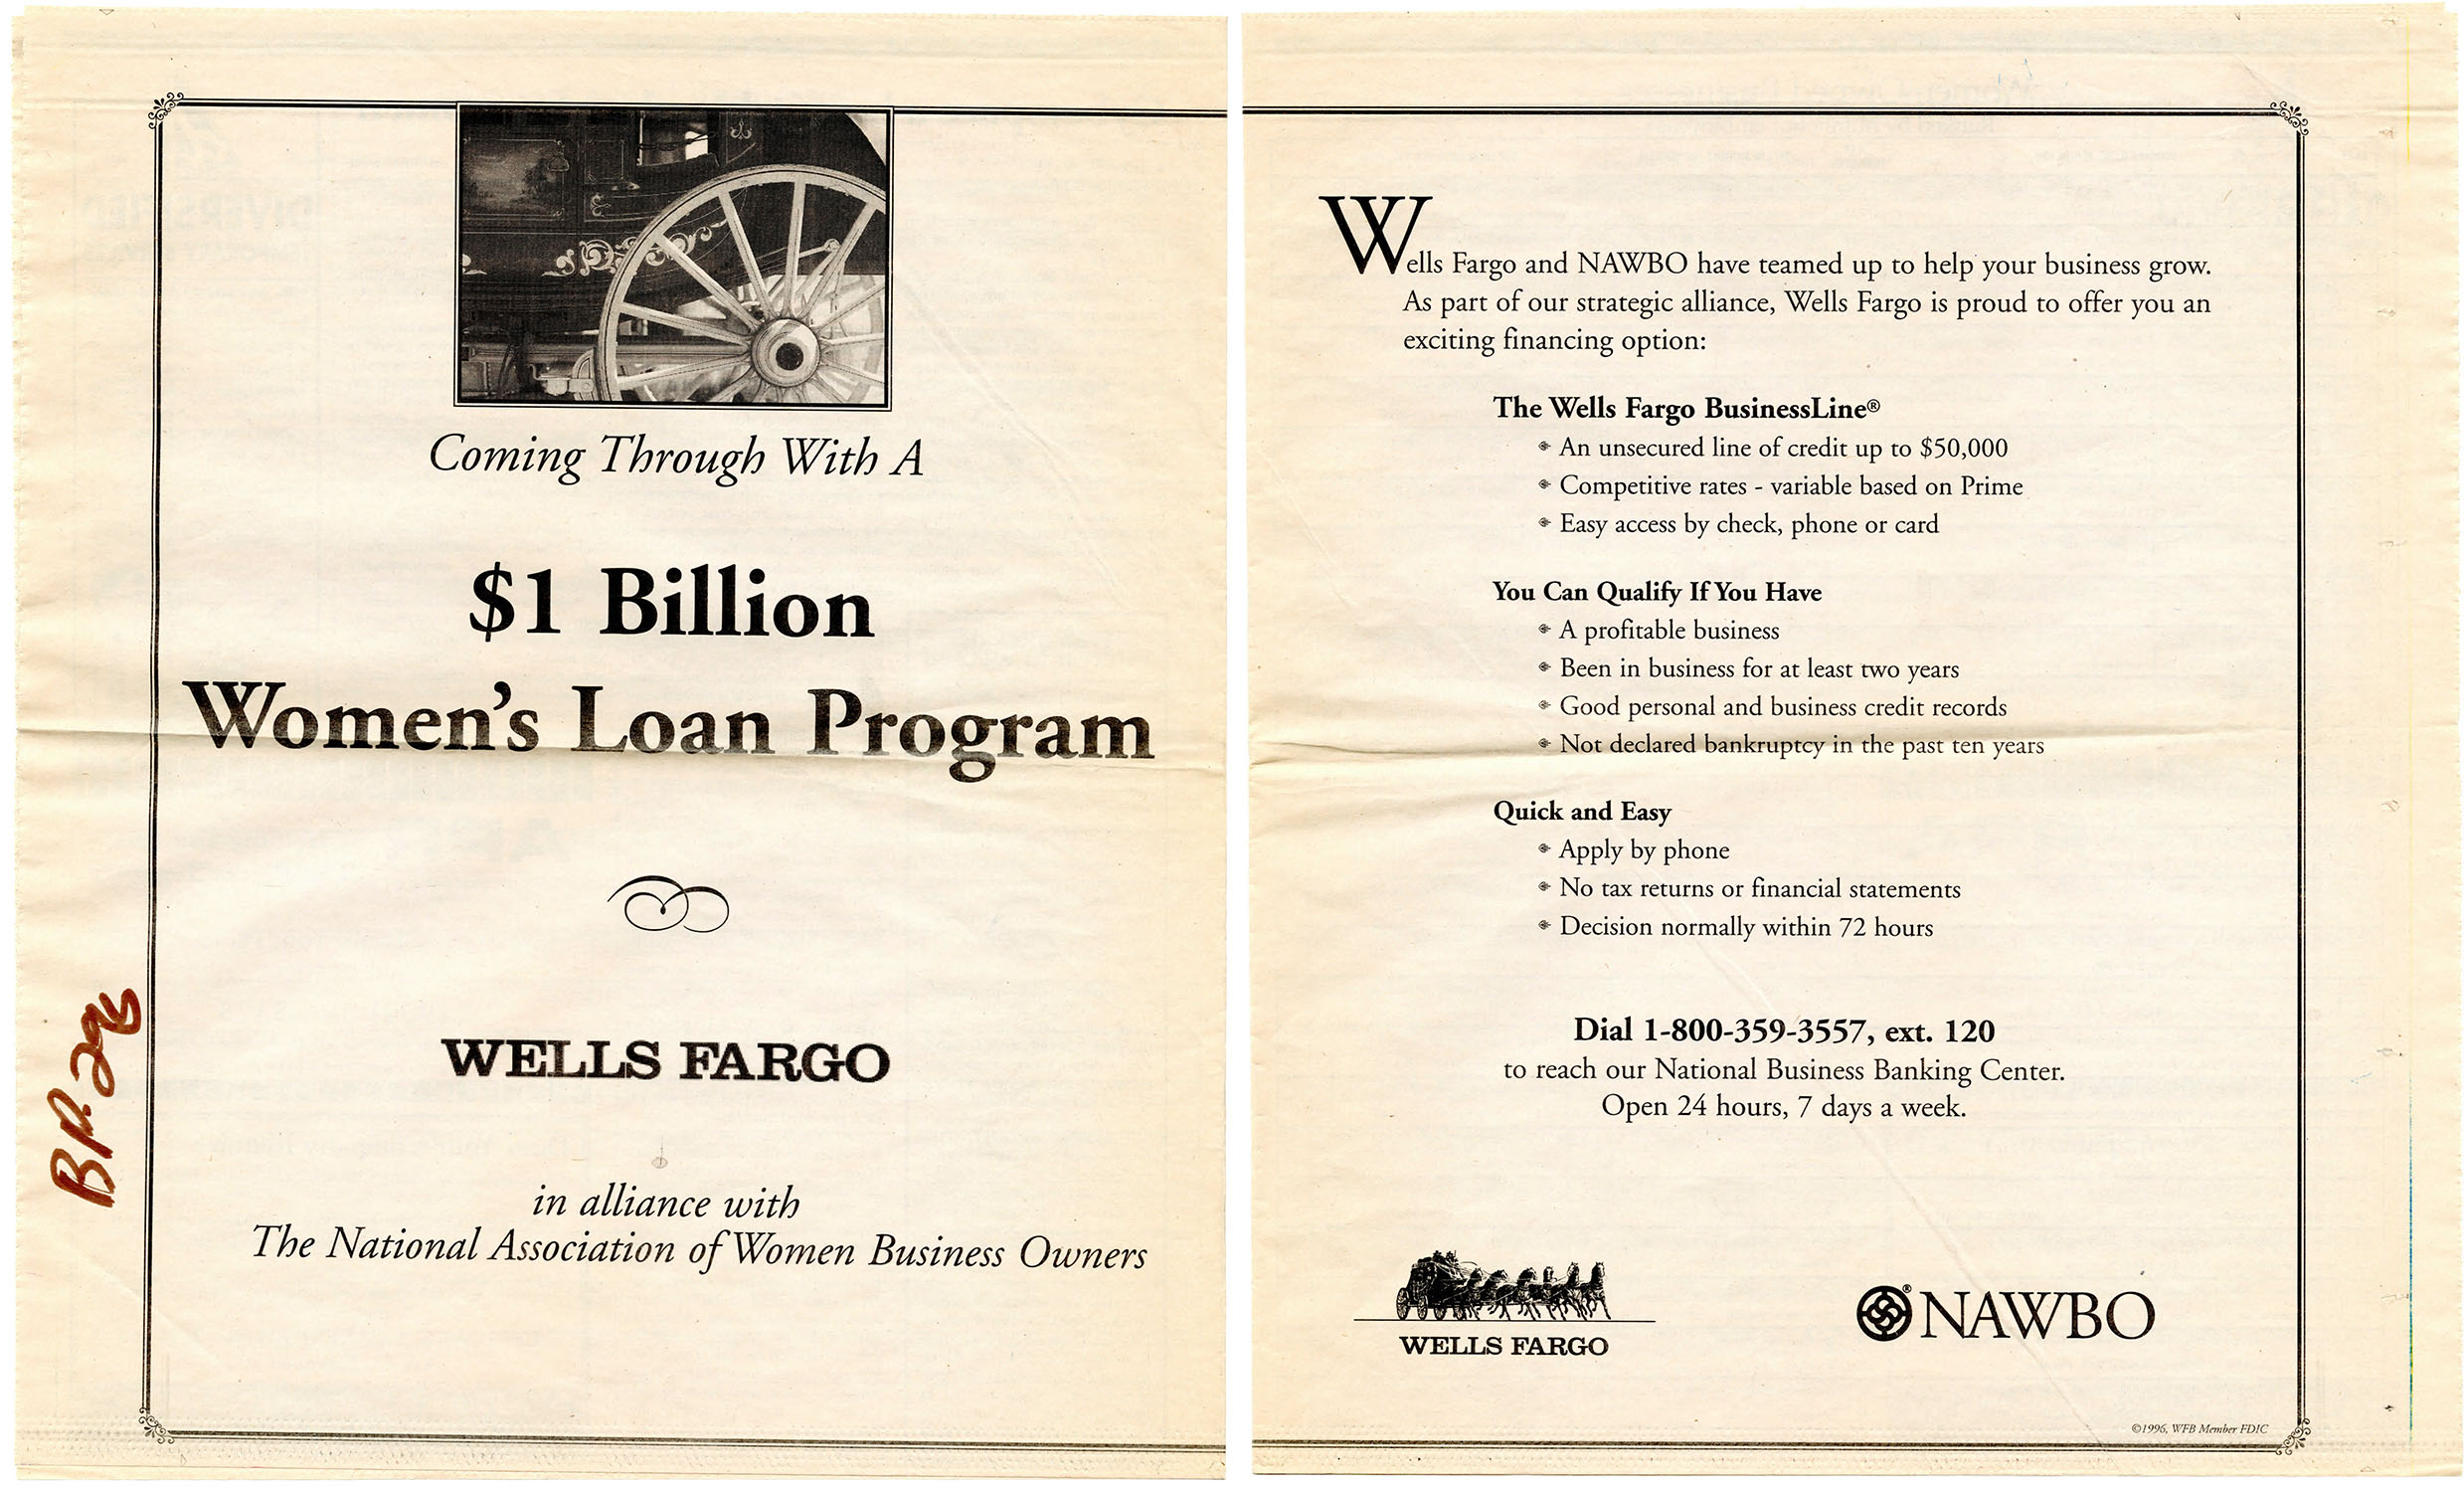 An advertisement for the Women’s Loan Program. There is a black and white photo of a stagecoach wheel at top and below reads: $1 Billion Women’s Loan Program. Wells Fargo. In Alliance with the National Association of Women Business Owners. Image link will enlarge image.